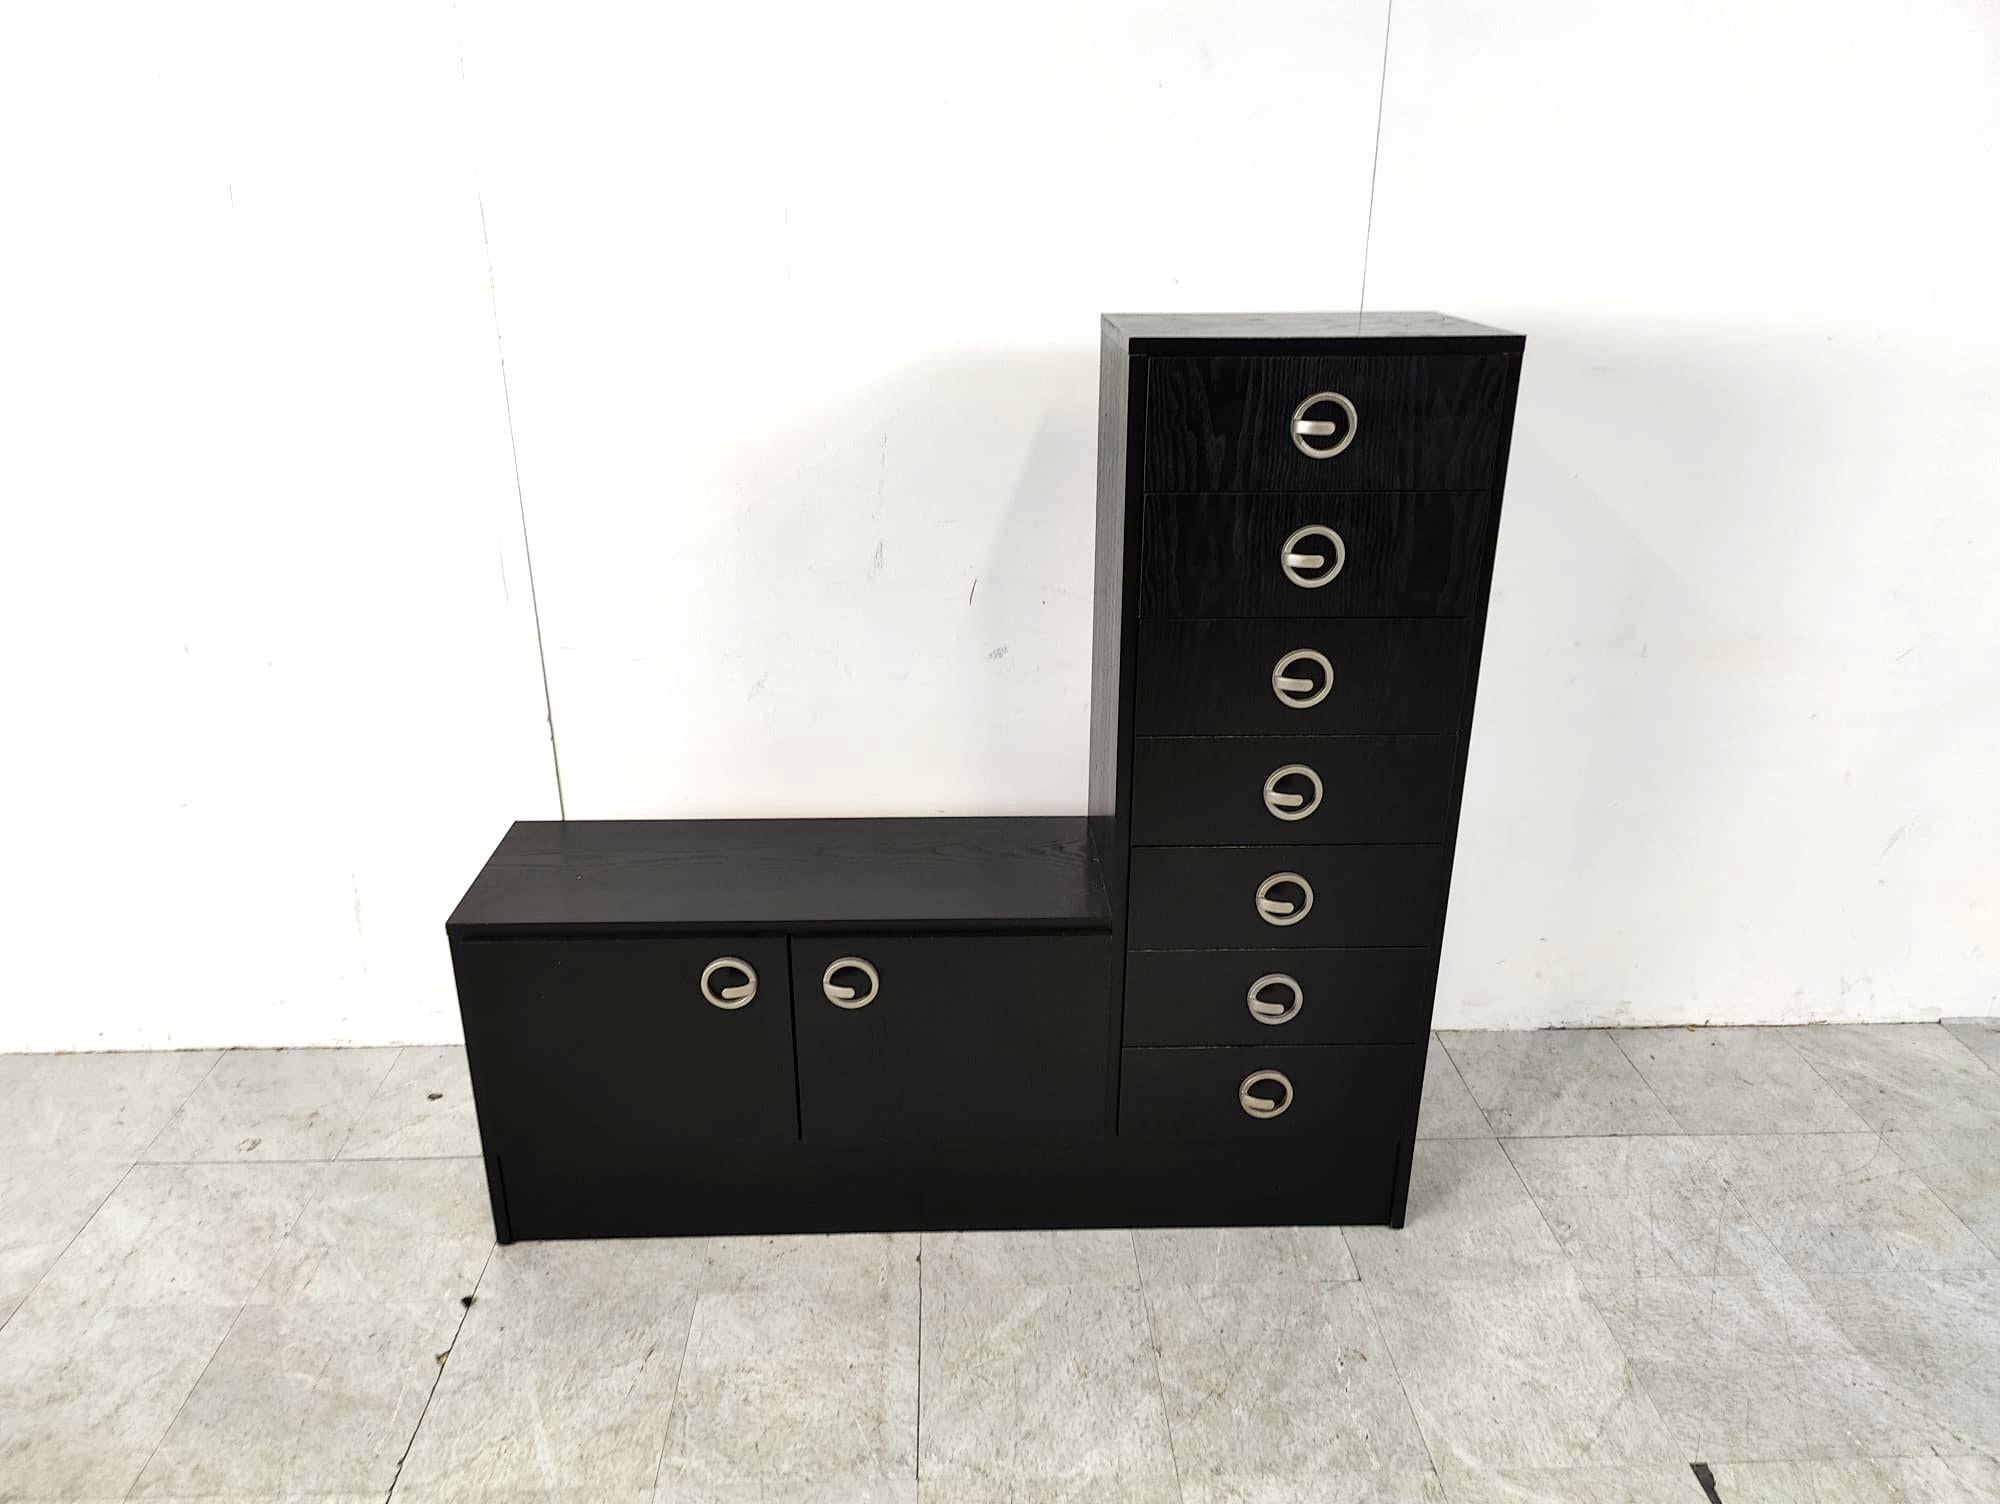 Vintage black wooden cabinet with two doors and 7 drawers.

The cabinet has some nice handles.

Ideal storage cabinet for small clothing, shoes,...

1970s - Belgium

Dimensions:

Height: 125cm
Width: 130cm
Depth: 34cm

Ref.: 6425153